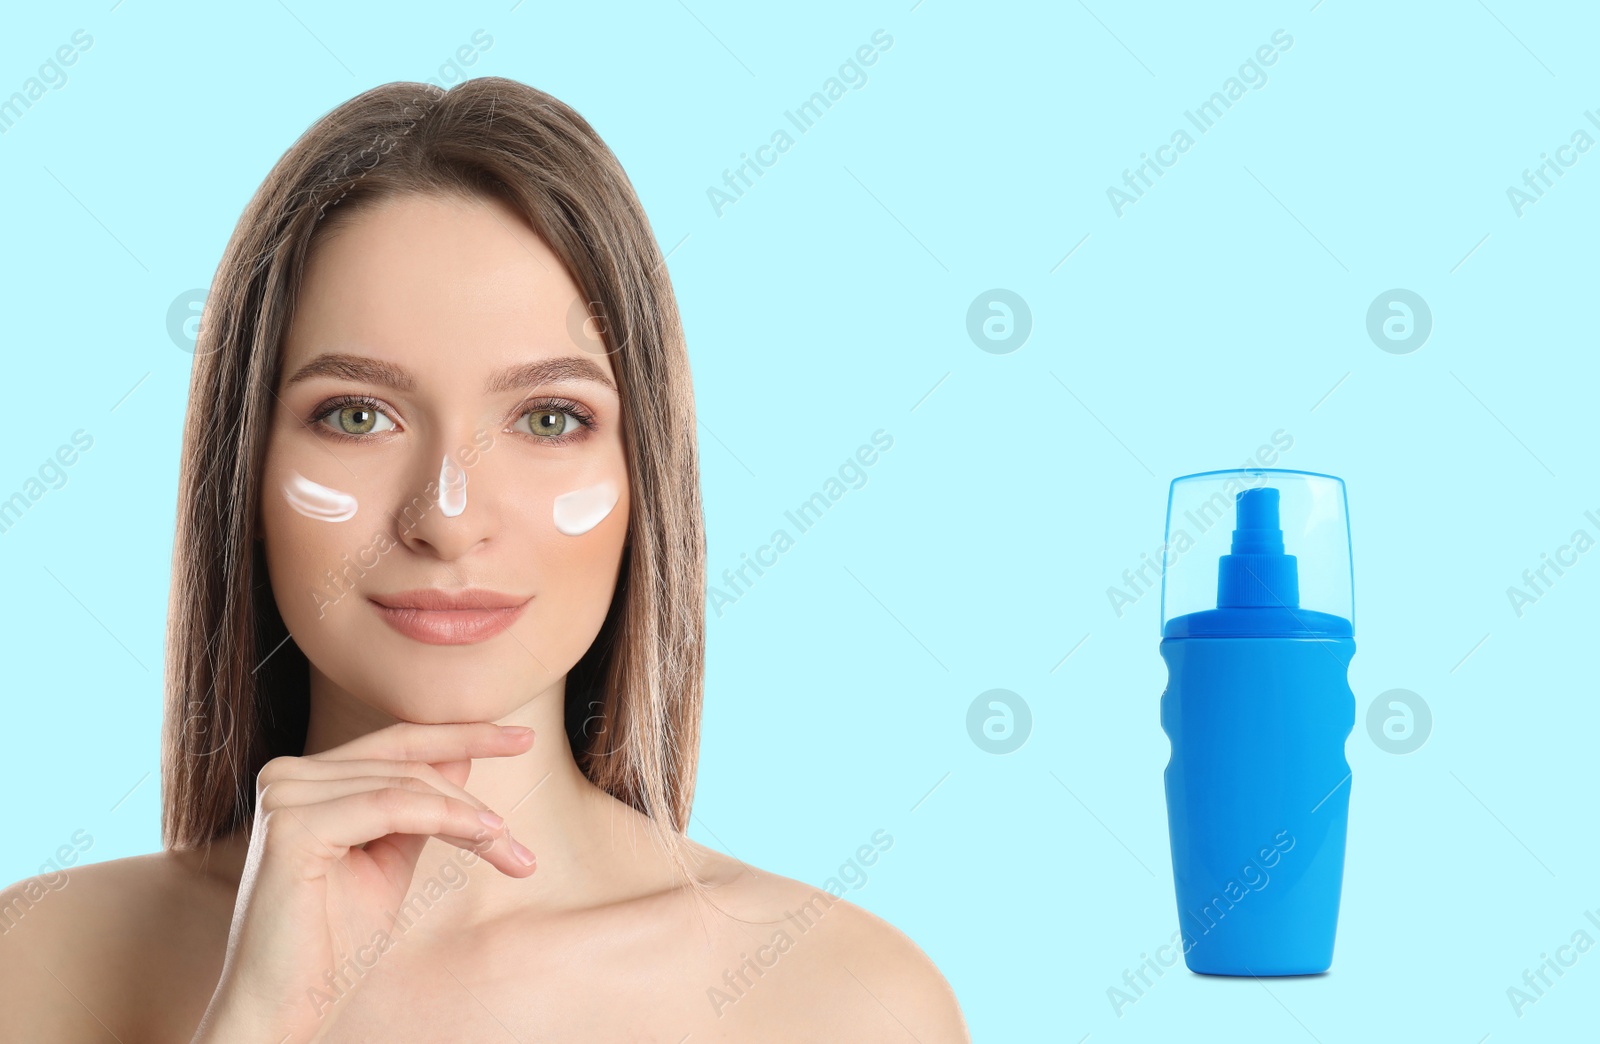 Image of Young woman and bottle of sun protection cream on light background